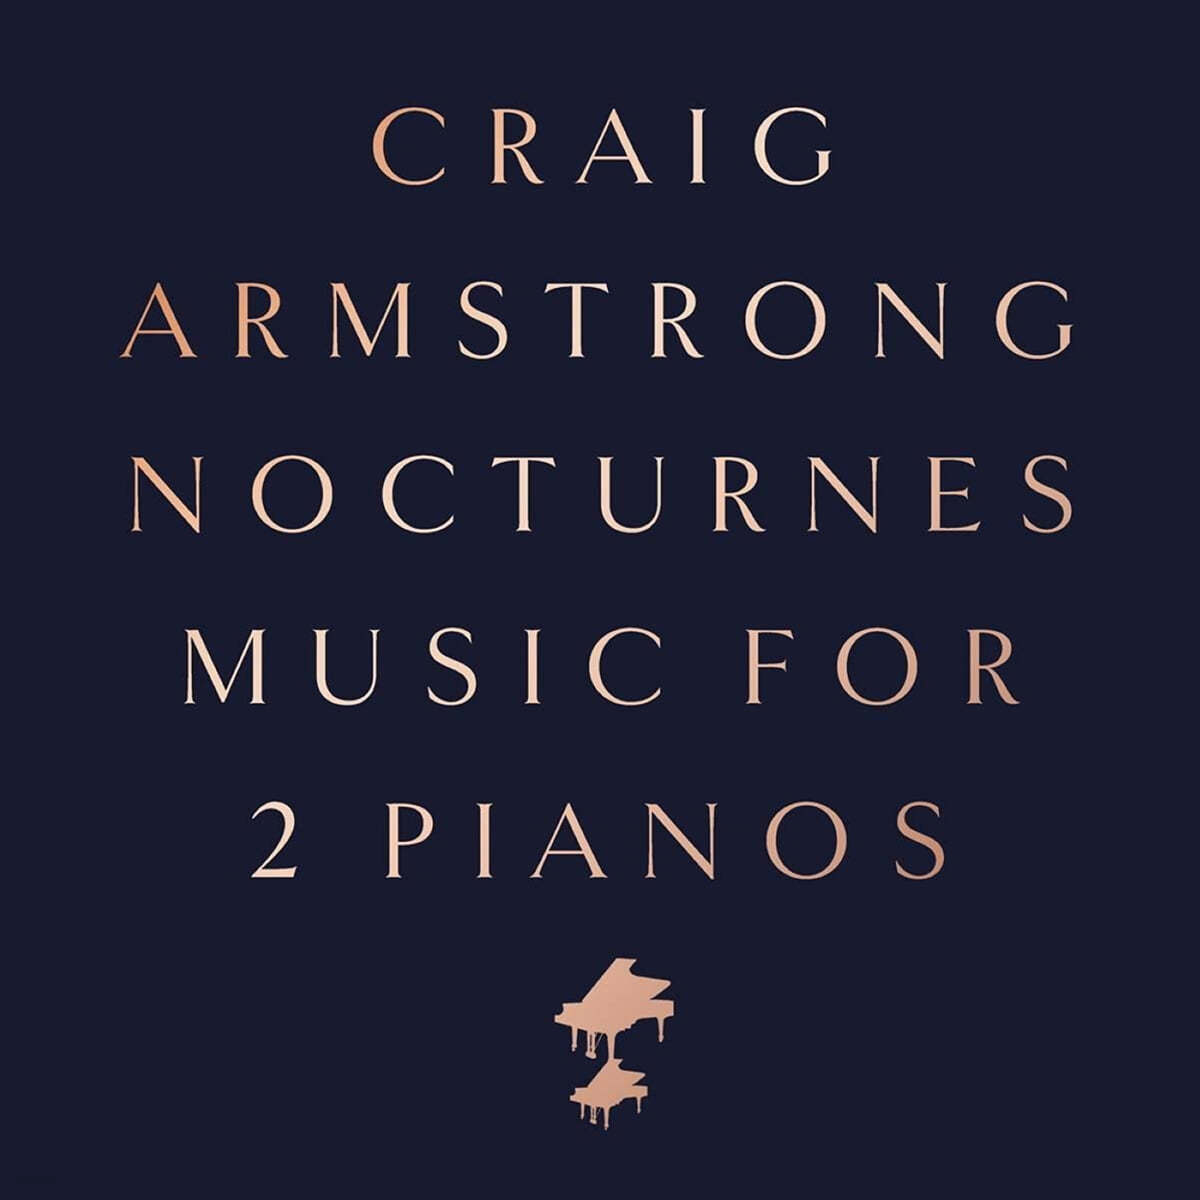 Craig Armstrong 두 대의 피아노를 위한 녹턴 (Nocturnes Music For 2 Pianos) [LP]